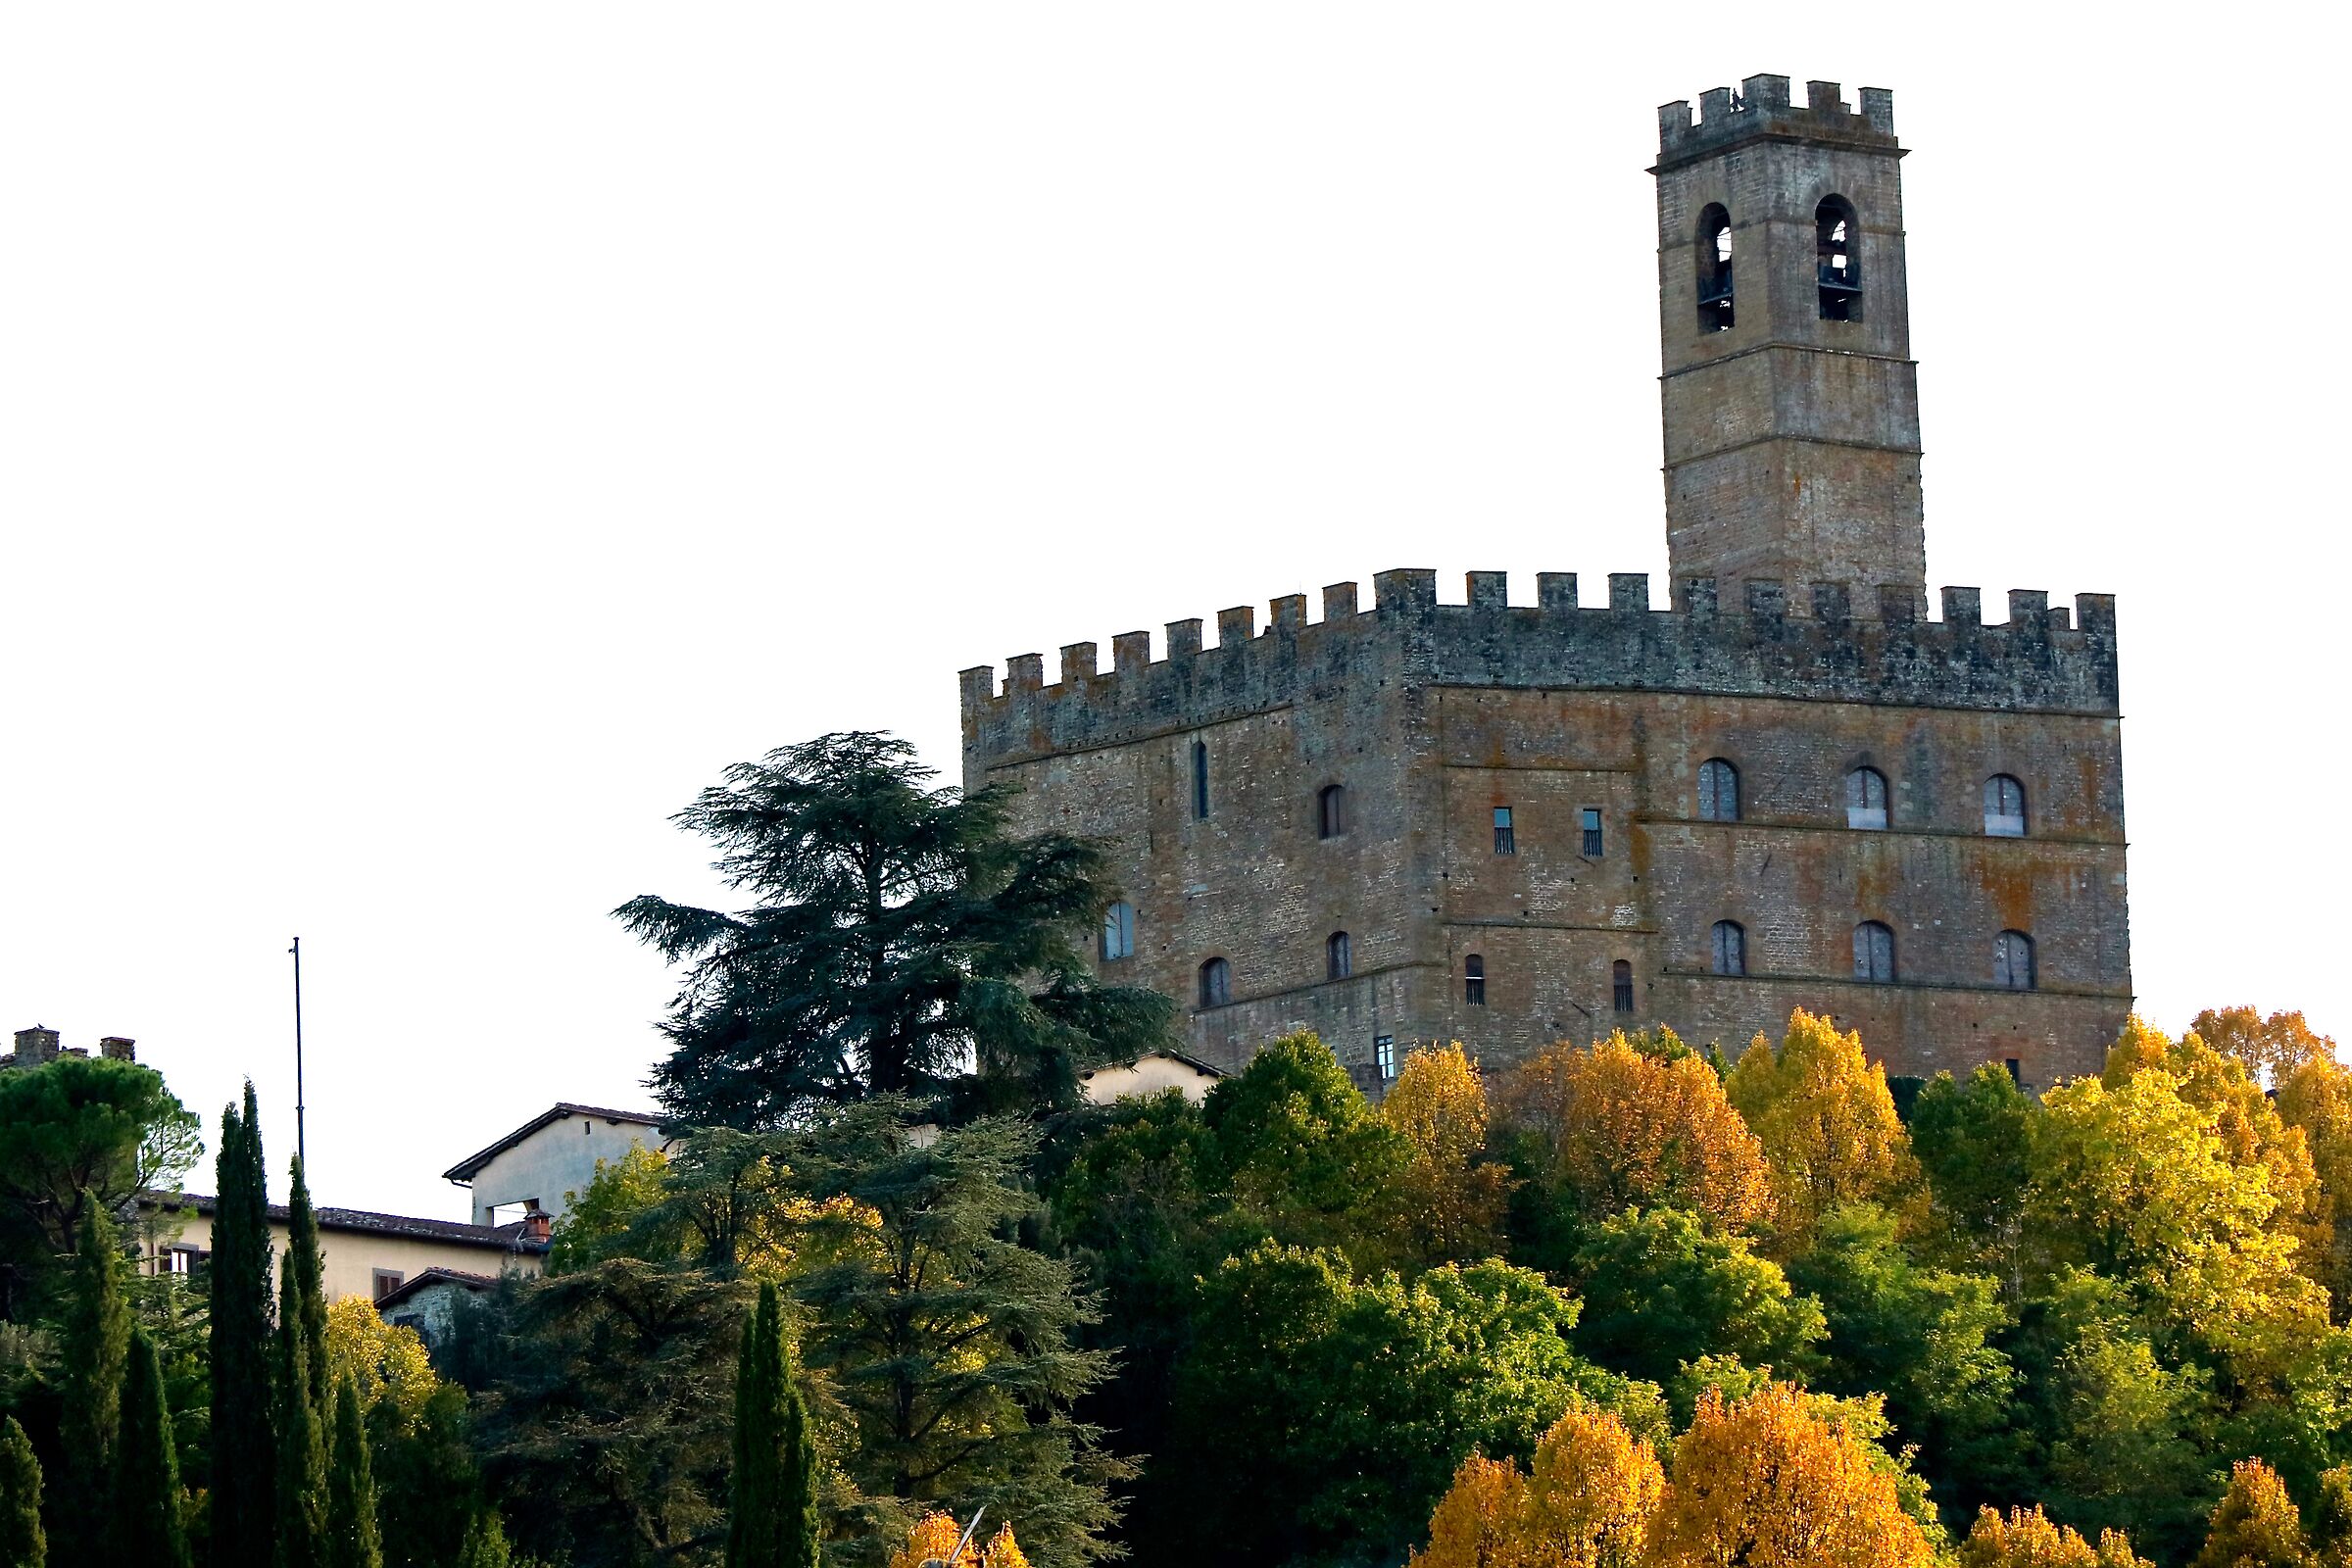 Casentino between castles and poetry....